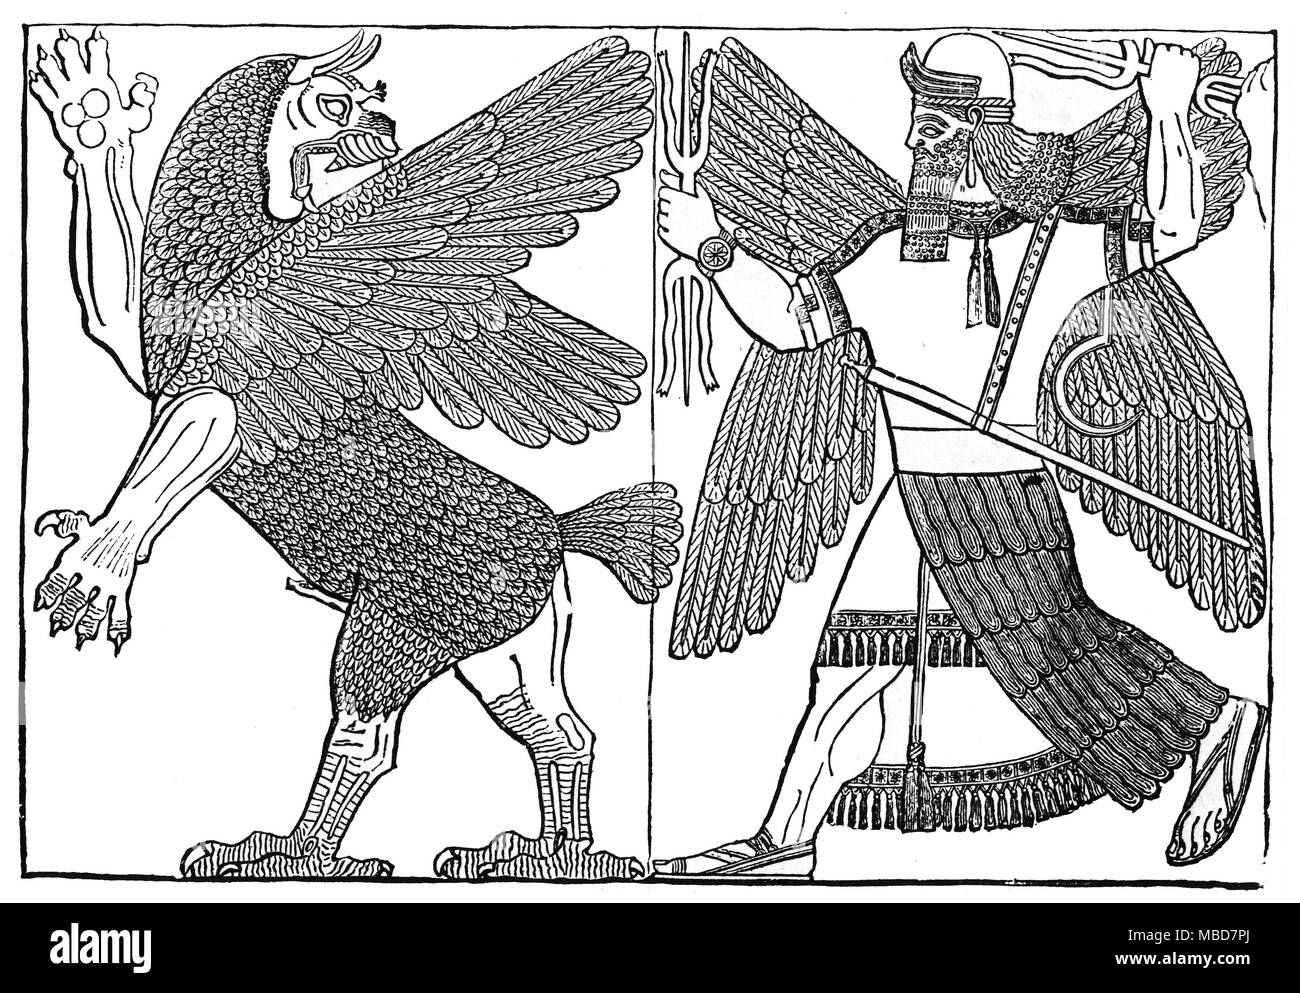 BABYLONIAN MYTHOLOGY - TIAMAT Fight between the god Bel, and the demon-dragon, Tiamat. From Zénaïde A. Ragozin, Chaldea from the Earliest Times to the Rise of Assyria,1889 Stock Photo